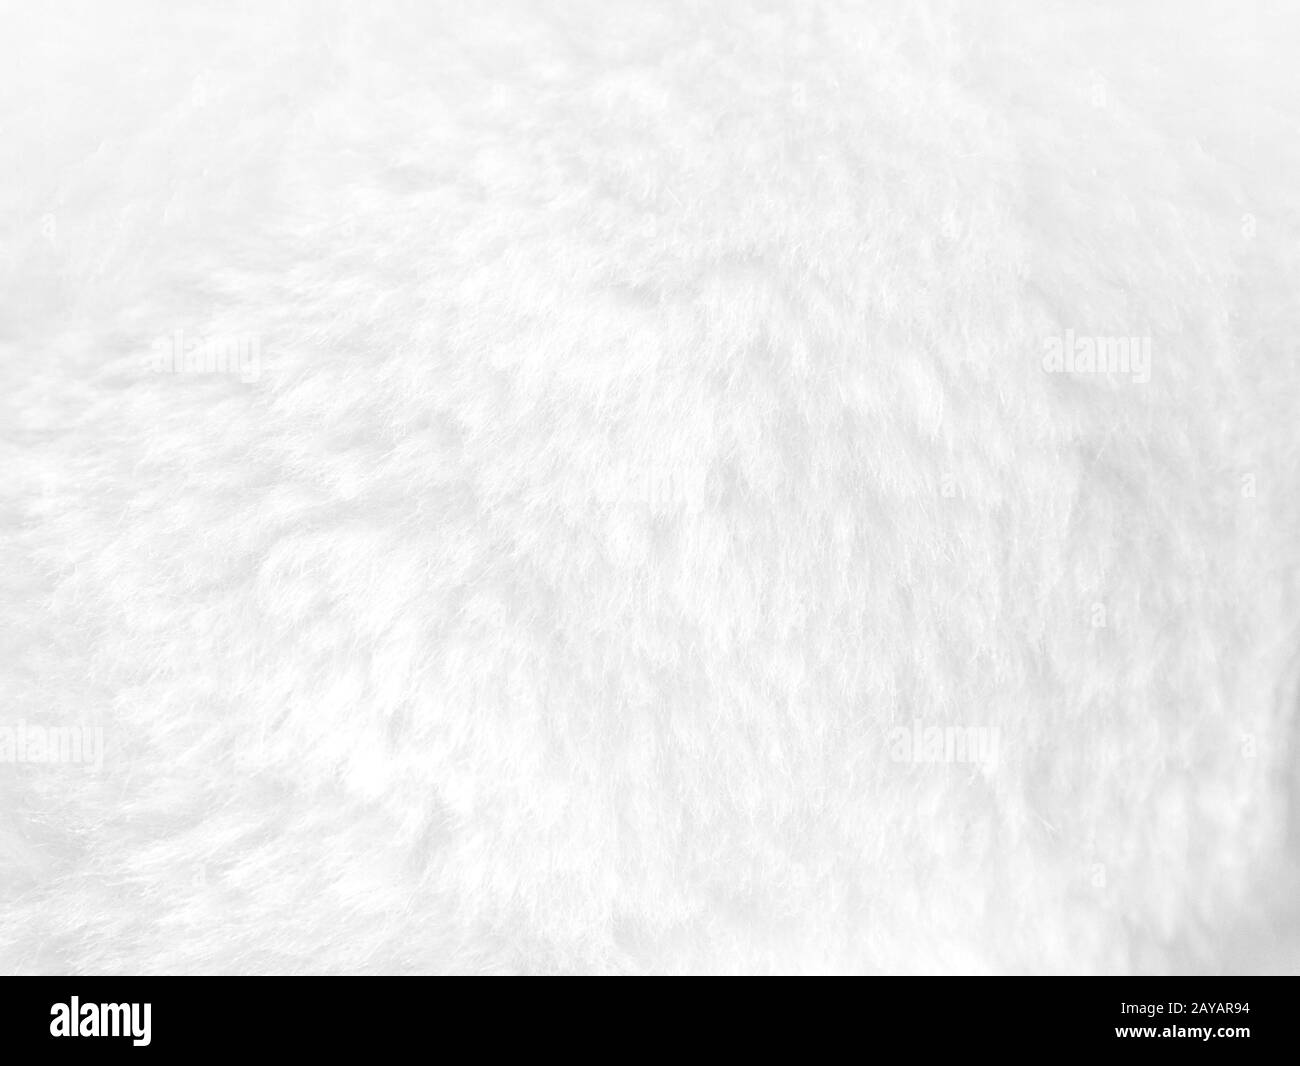 White fur background close up view Stock Photo